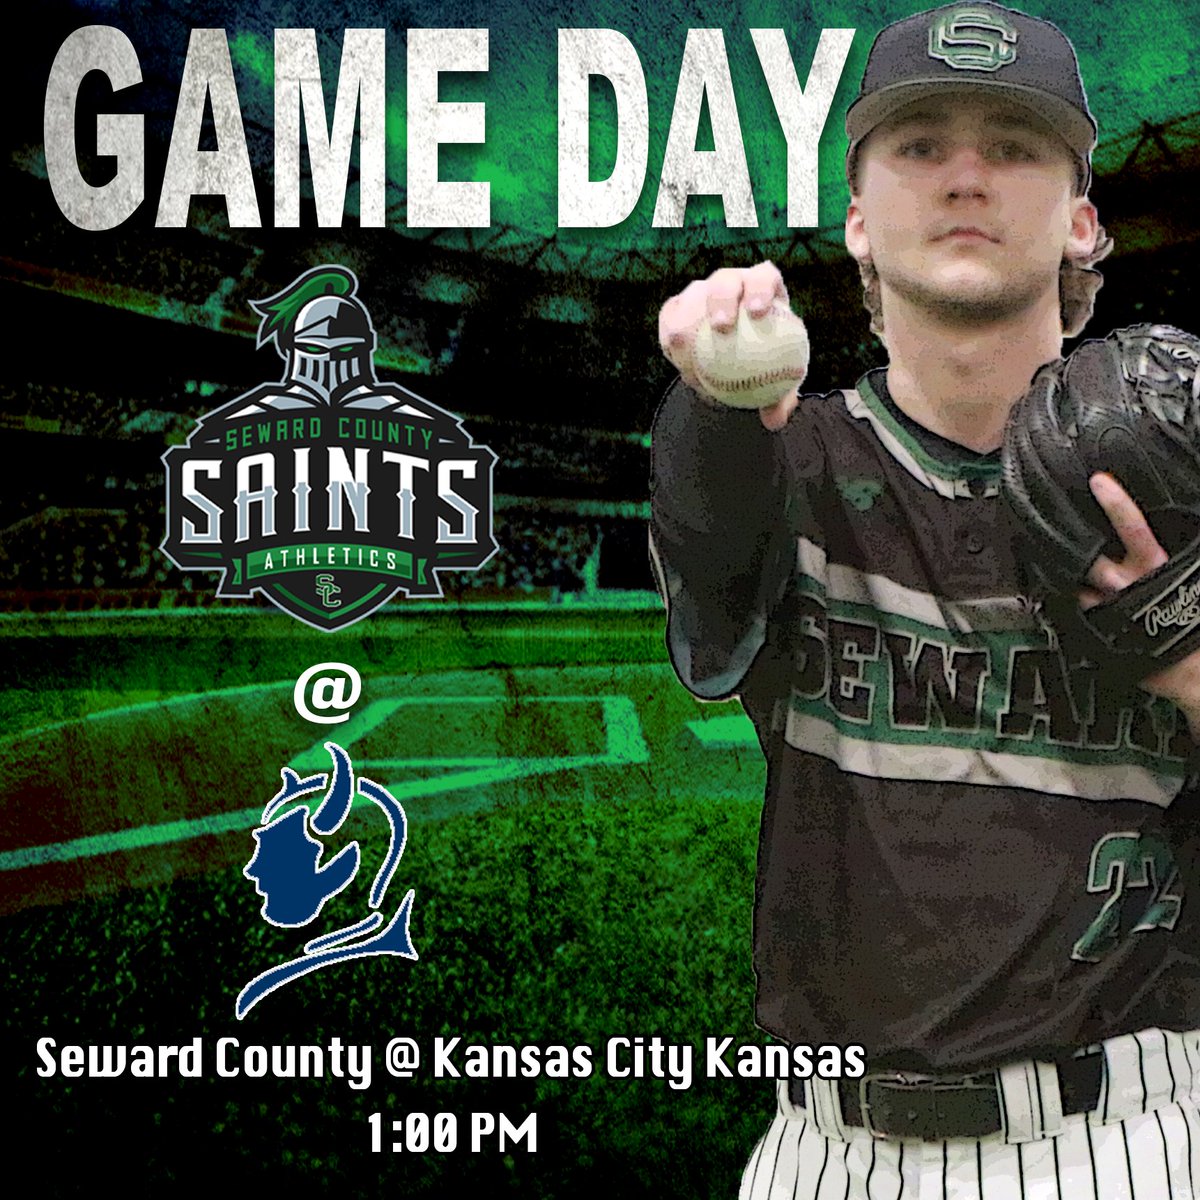 It's Playoff Time! ⚾️ Seward County begins their first round of the Region VI playoffs out east against the Blue Devils of KCK with game one of the series taking place at 1:00 PM 🔗 SewardSaints.com 📌 Kansas City, KS 📺 youtube.com/@4teez